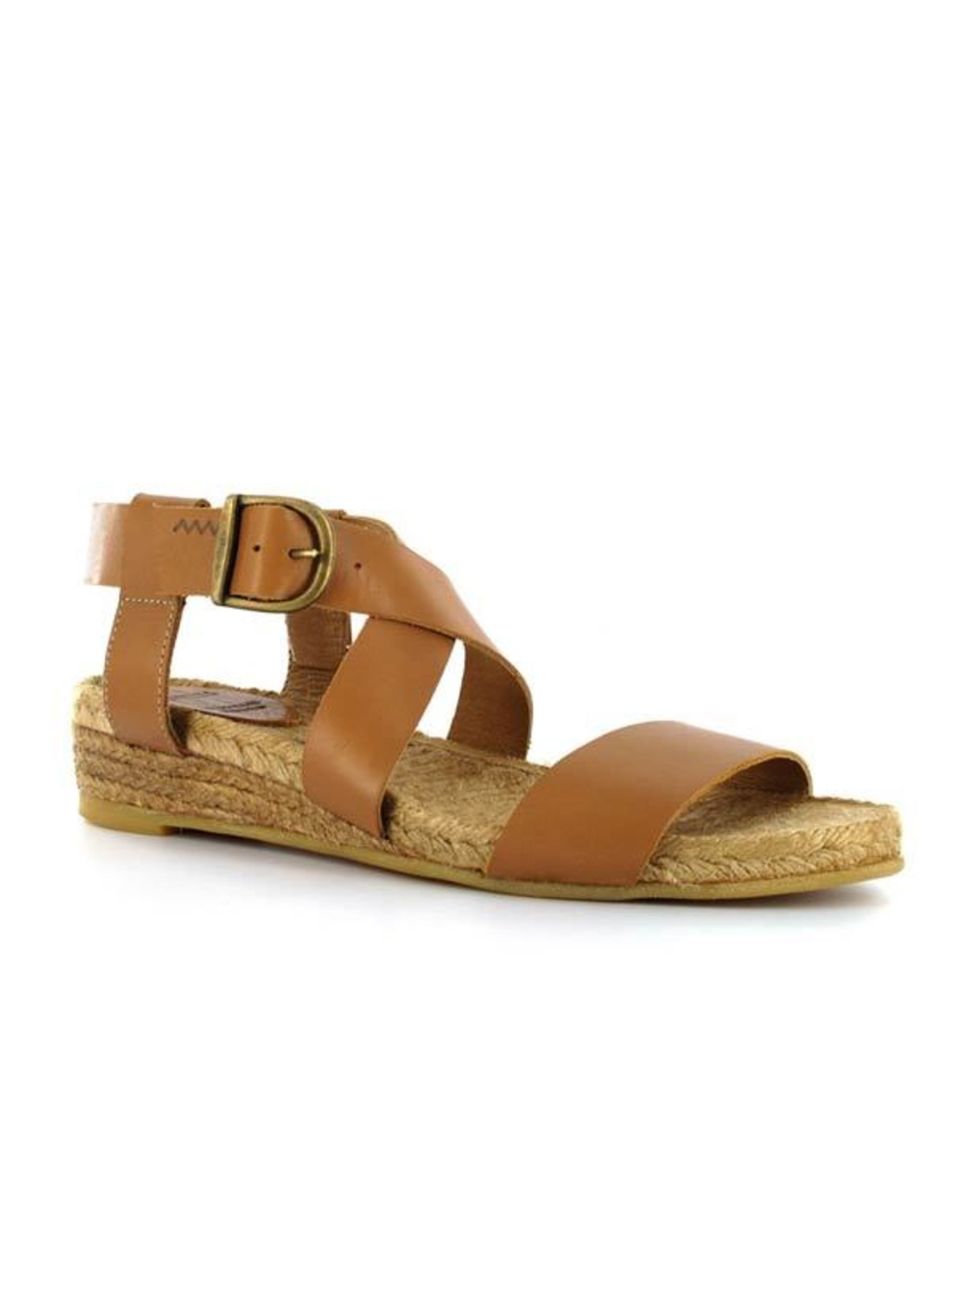 <p>Our latest online shopping discovery offers luxe wardrobe staples with attainable price tags. Discover the labels espadrille sandals <a href="http://www.medwinds.com/store/en/mujer-1/zapatos/sargantana-espadrille-sandals.html?p=2&amp;mode_append=1&am